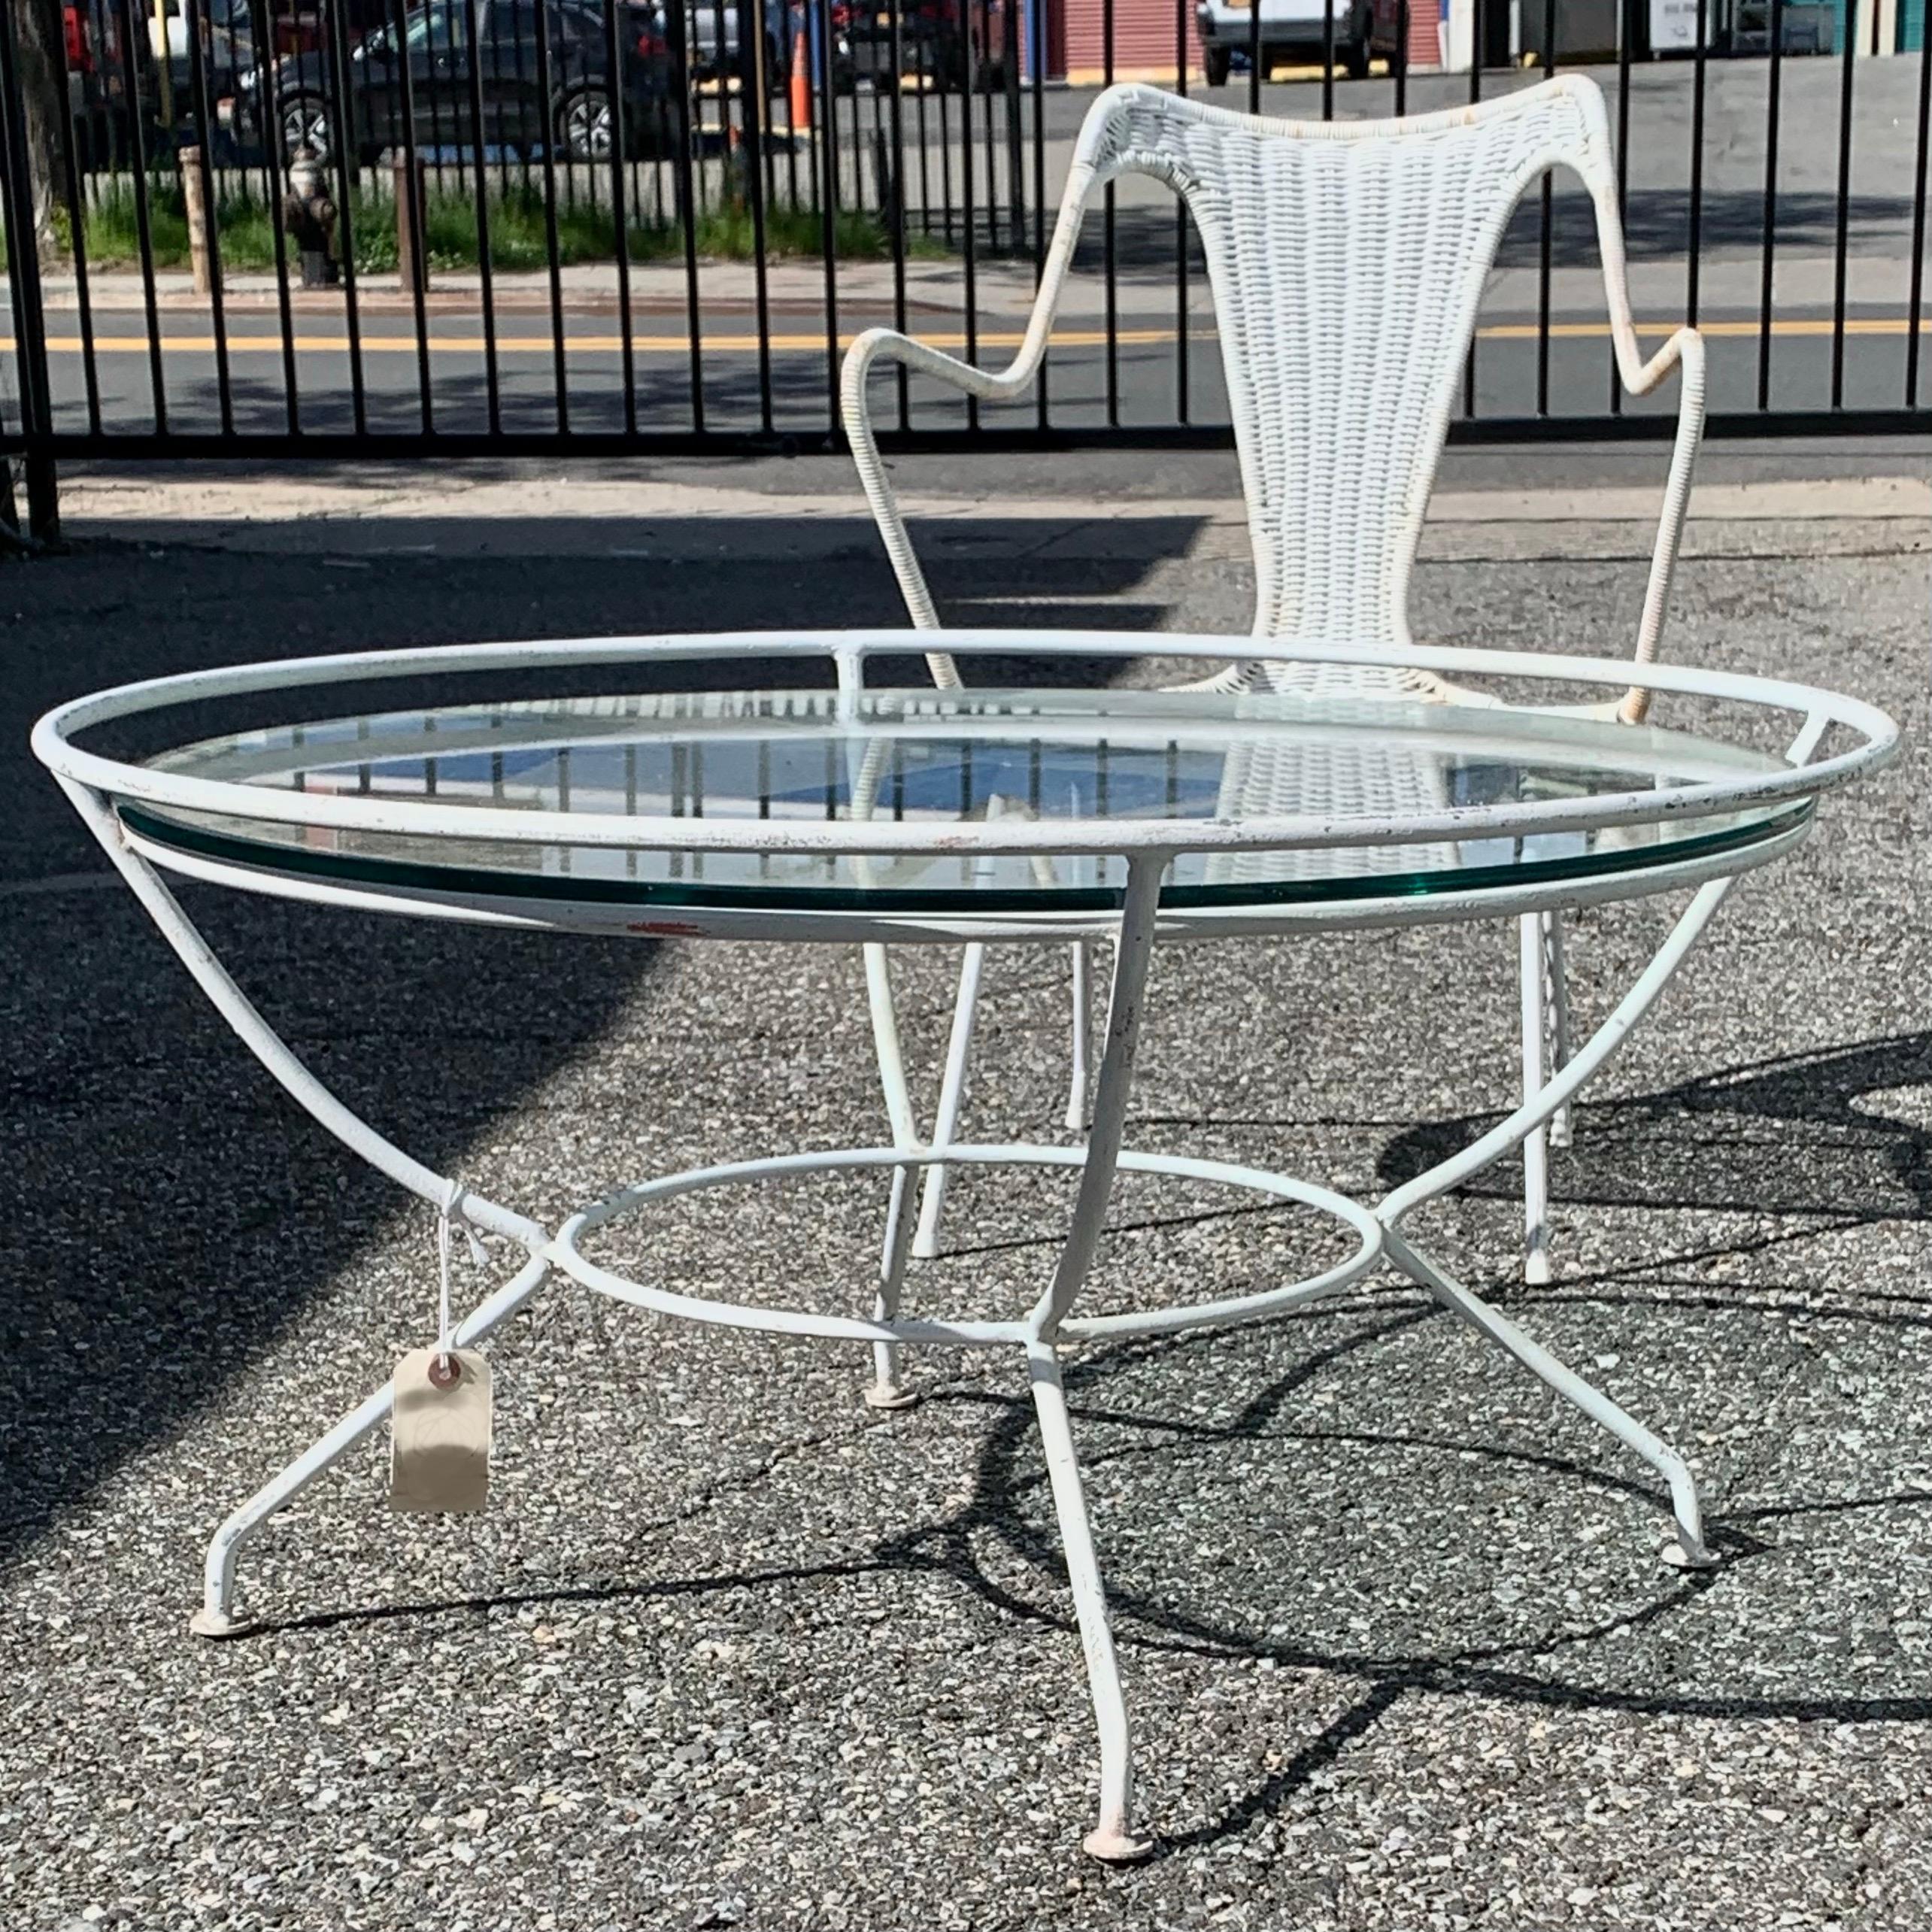 Maurizio Tempestini for Satlerini Patio Set, White Reed Enameled steel 1960s. Rare set includes 4 lounge chairs and coffee table. Original finish. Lovely and relaxing alternative to the standard dining set. Perfect for lounging outdoors with loved